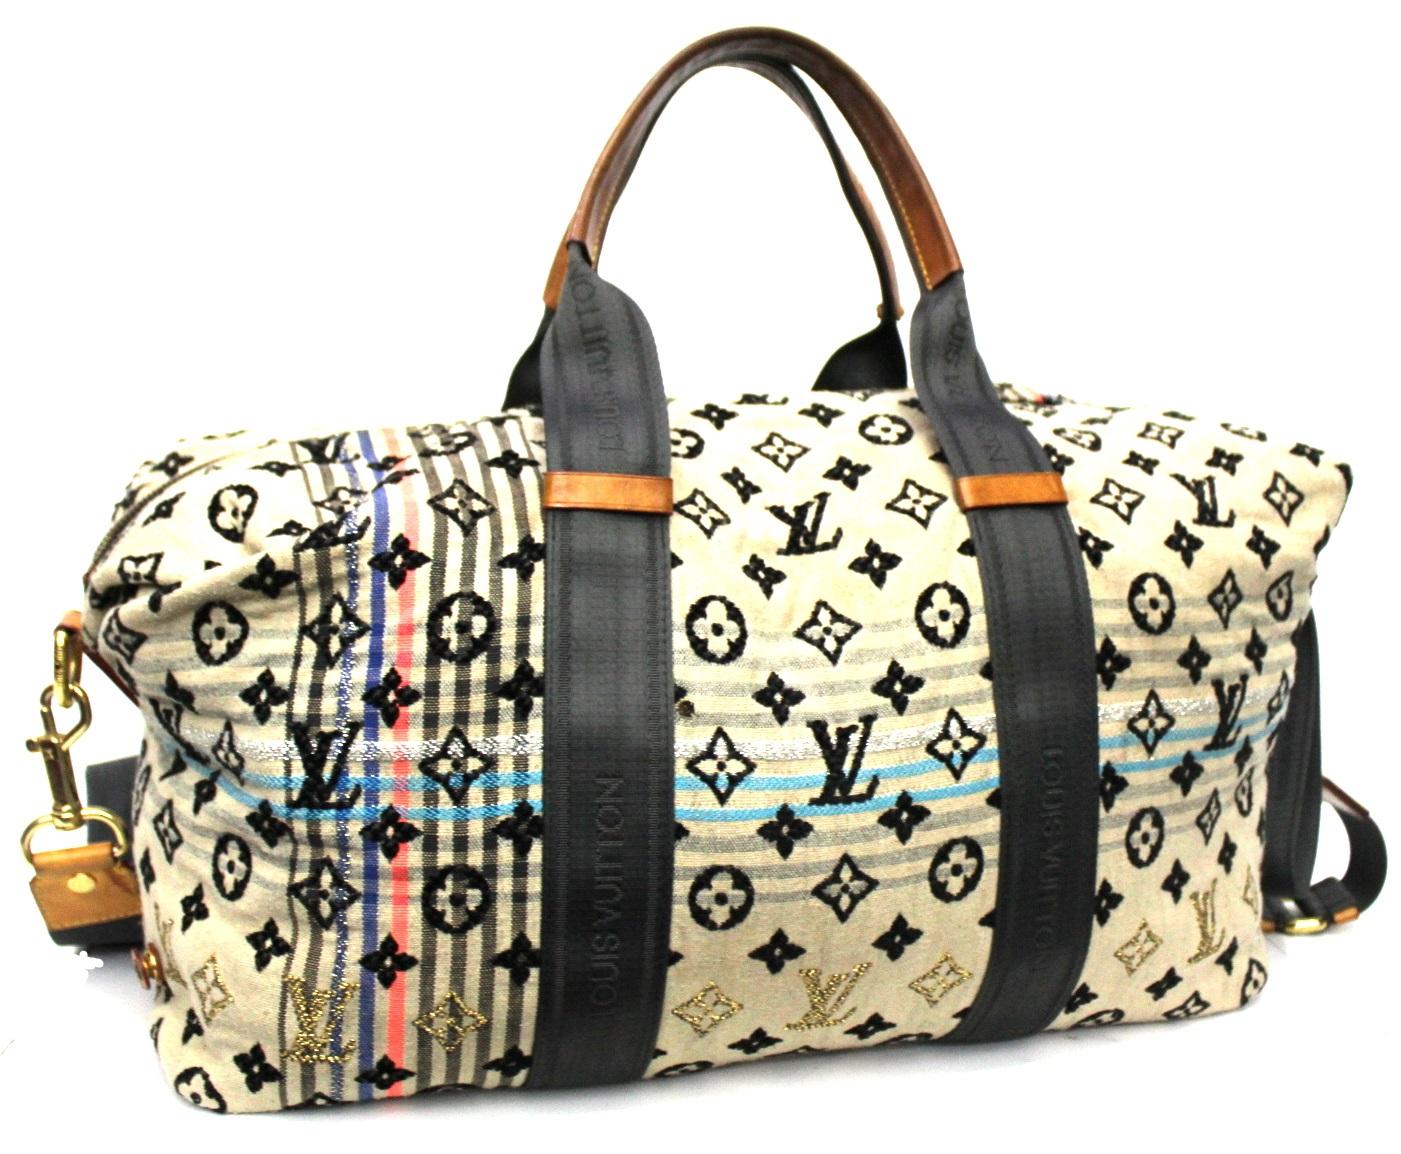 This vibrant and playful Louis Vuitton Limited Edition Beige Monogram Cheche Tuareg Bag is one amazing bag. Named after a protective garment worn over the head and neck, the Cheche bags play on contrast of fabric and texture. This bag is made from